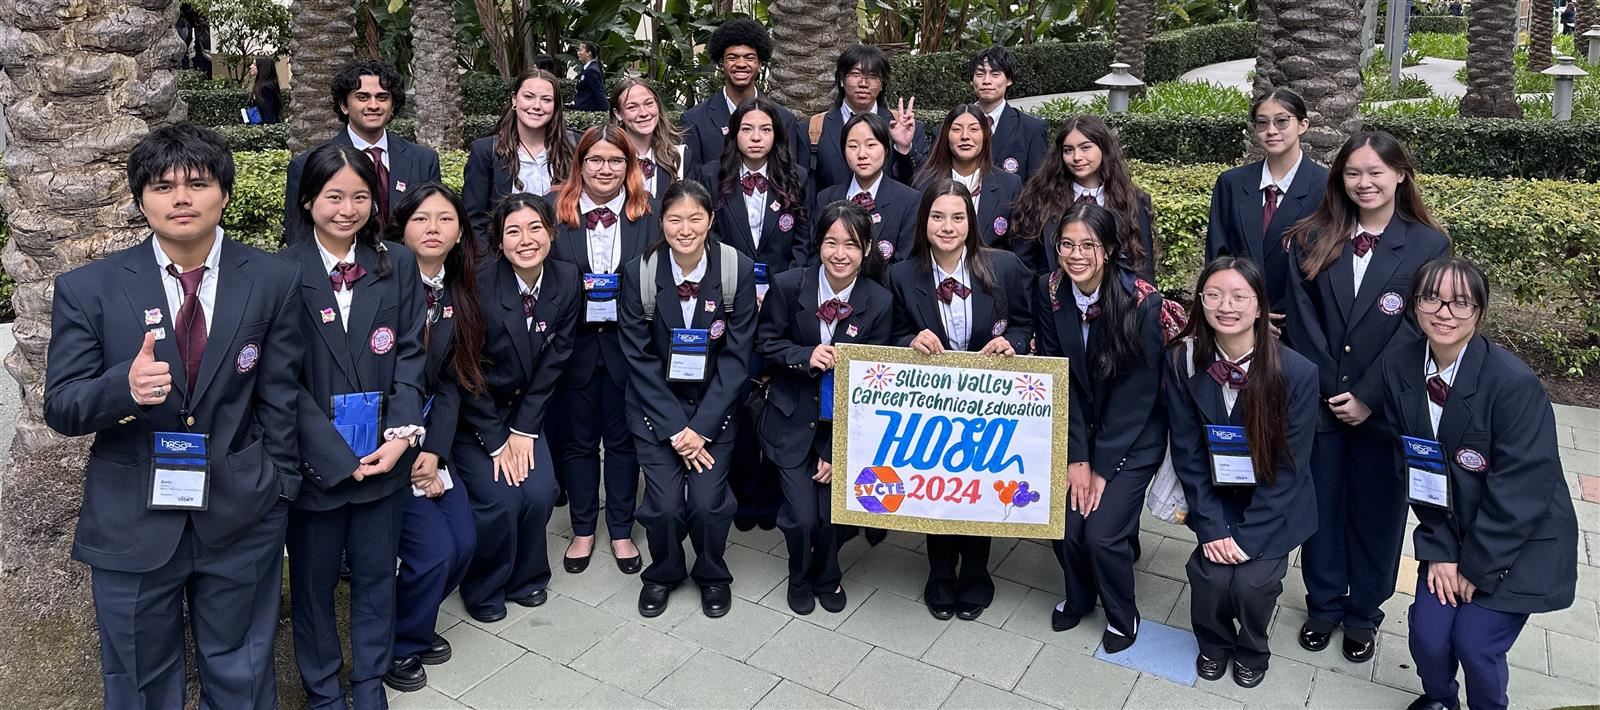  Silicon Valley Career Technical Education students who performed at the 2024 HOSA State Competition